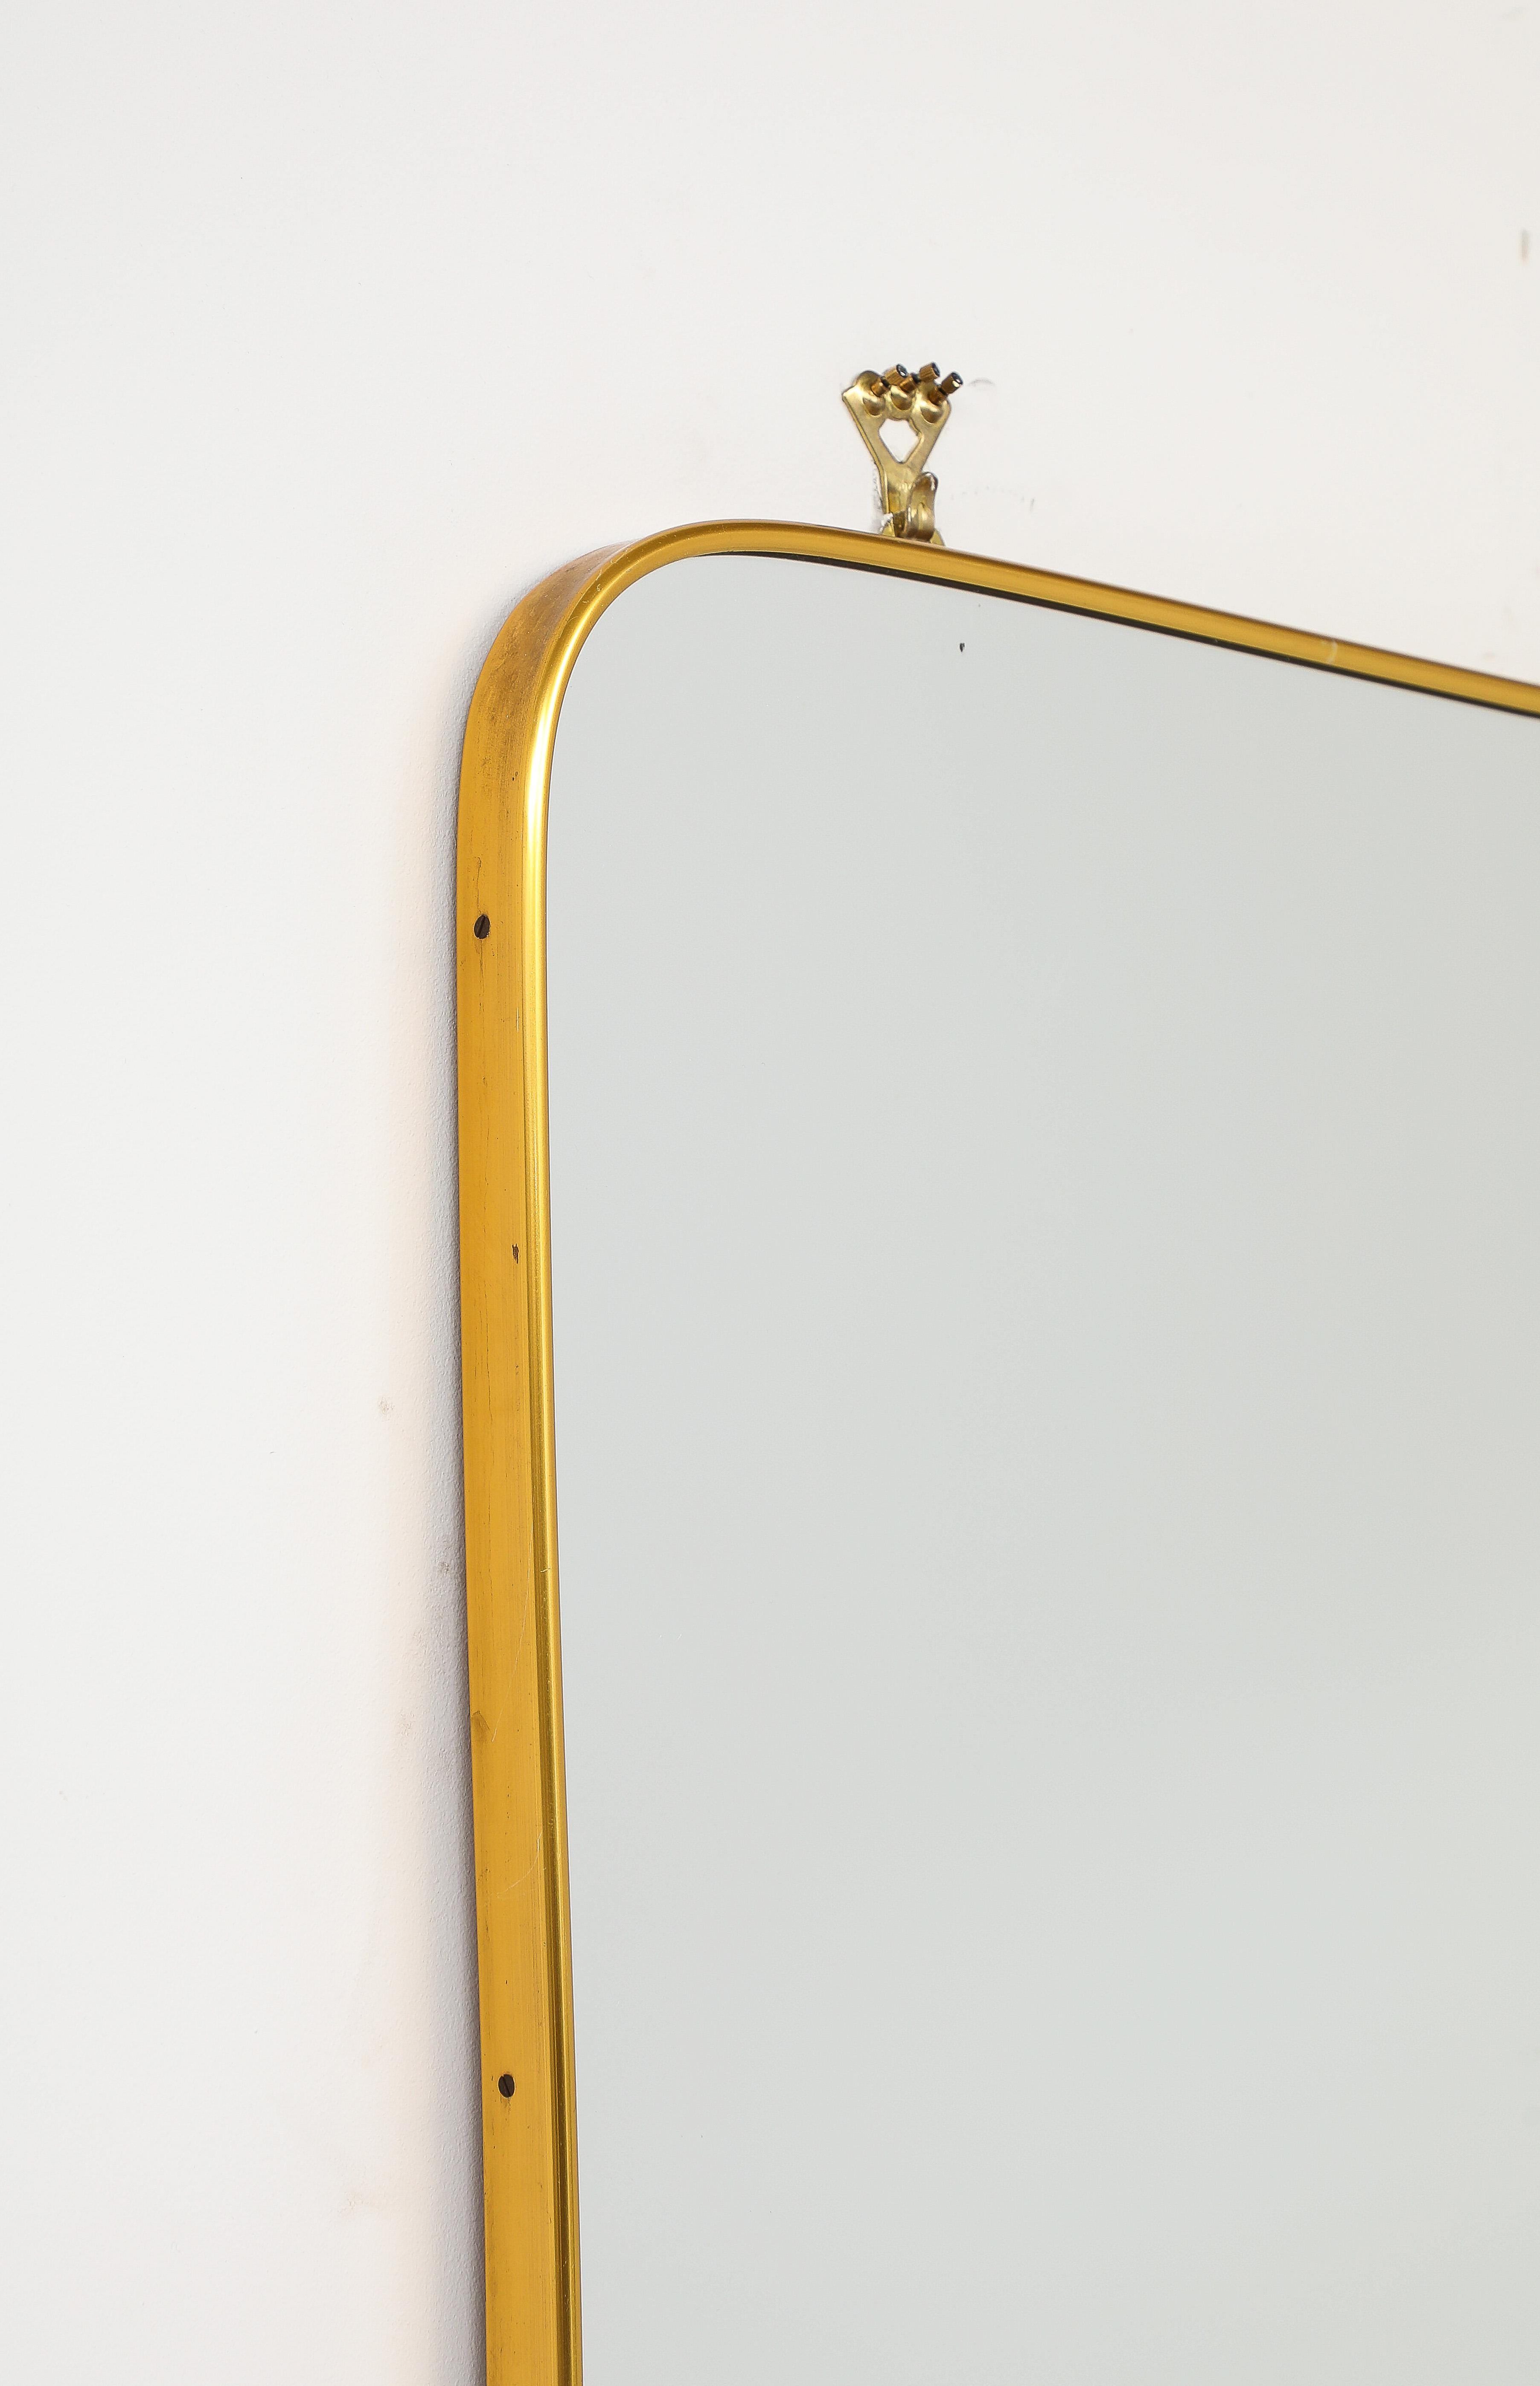 Italian Gio Ponti Style Modernist Dressing Mirror, Italy, 1950's For Sale